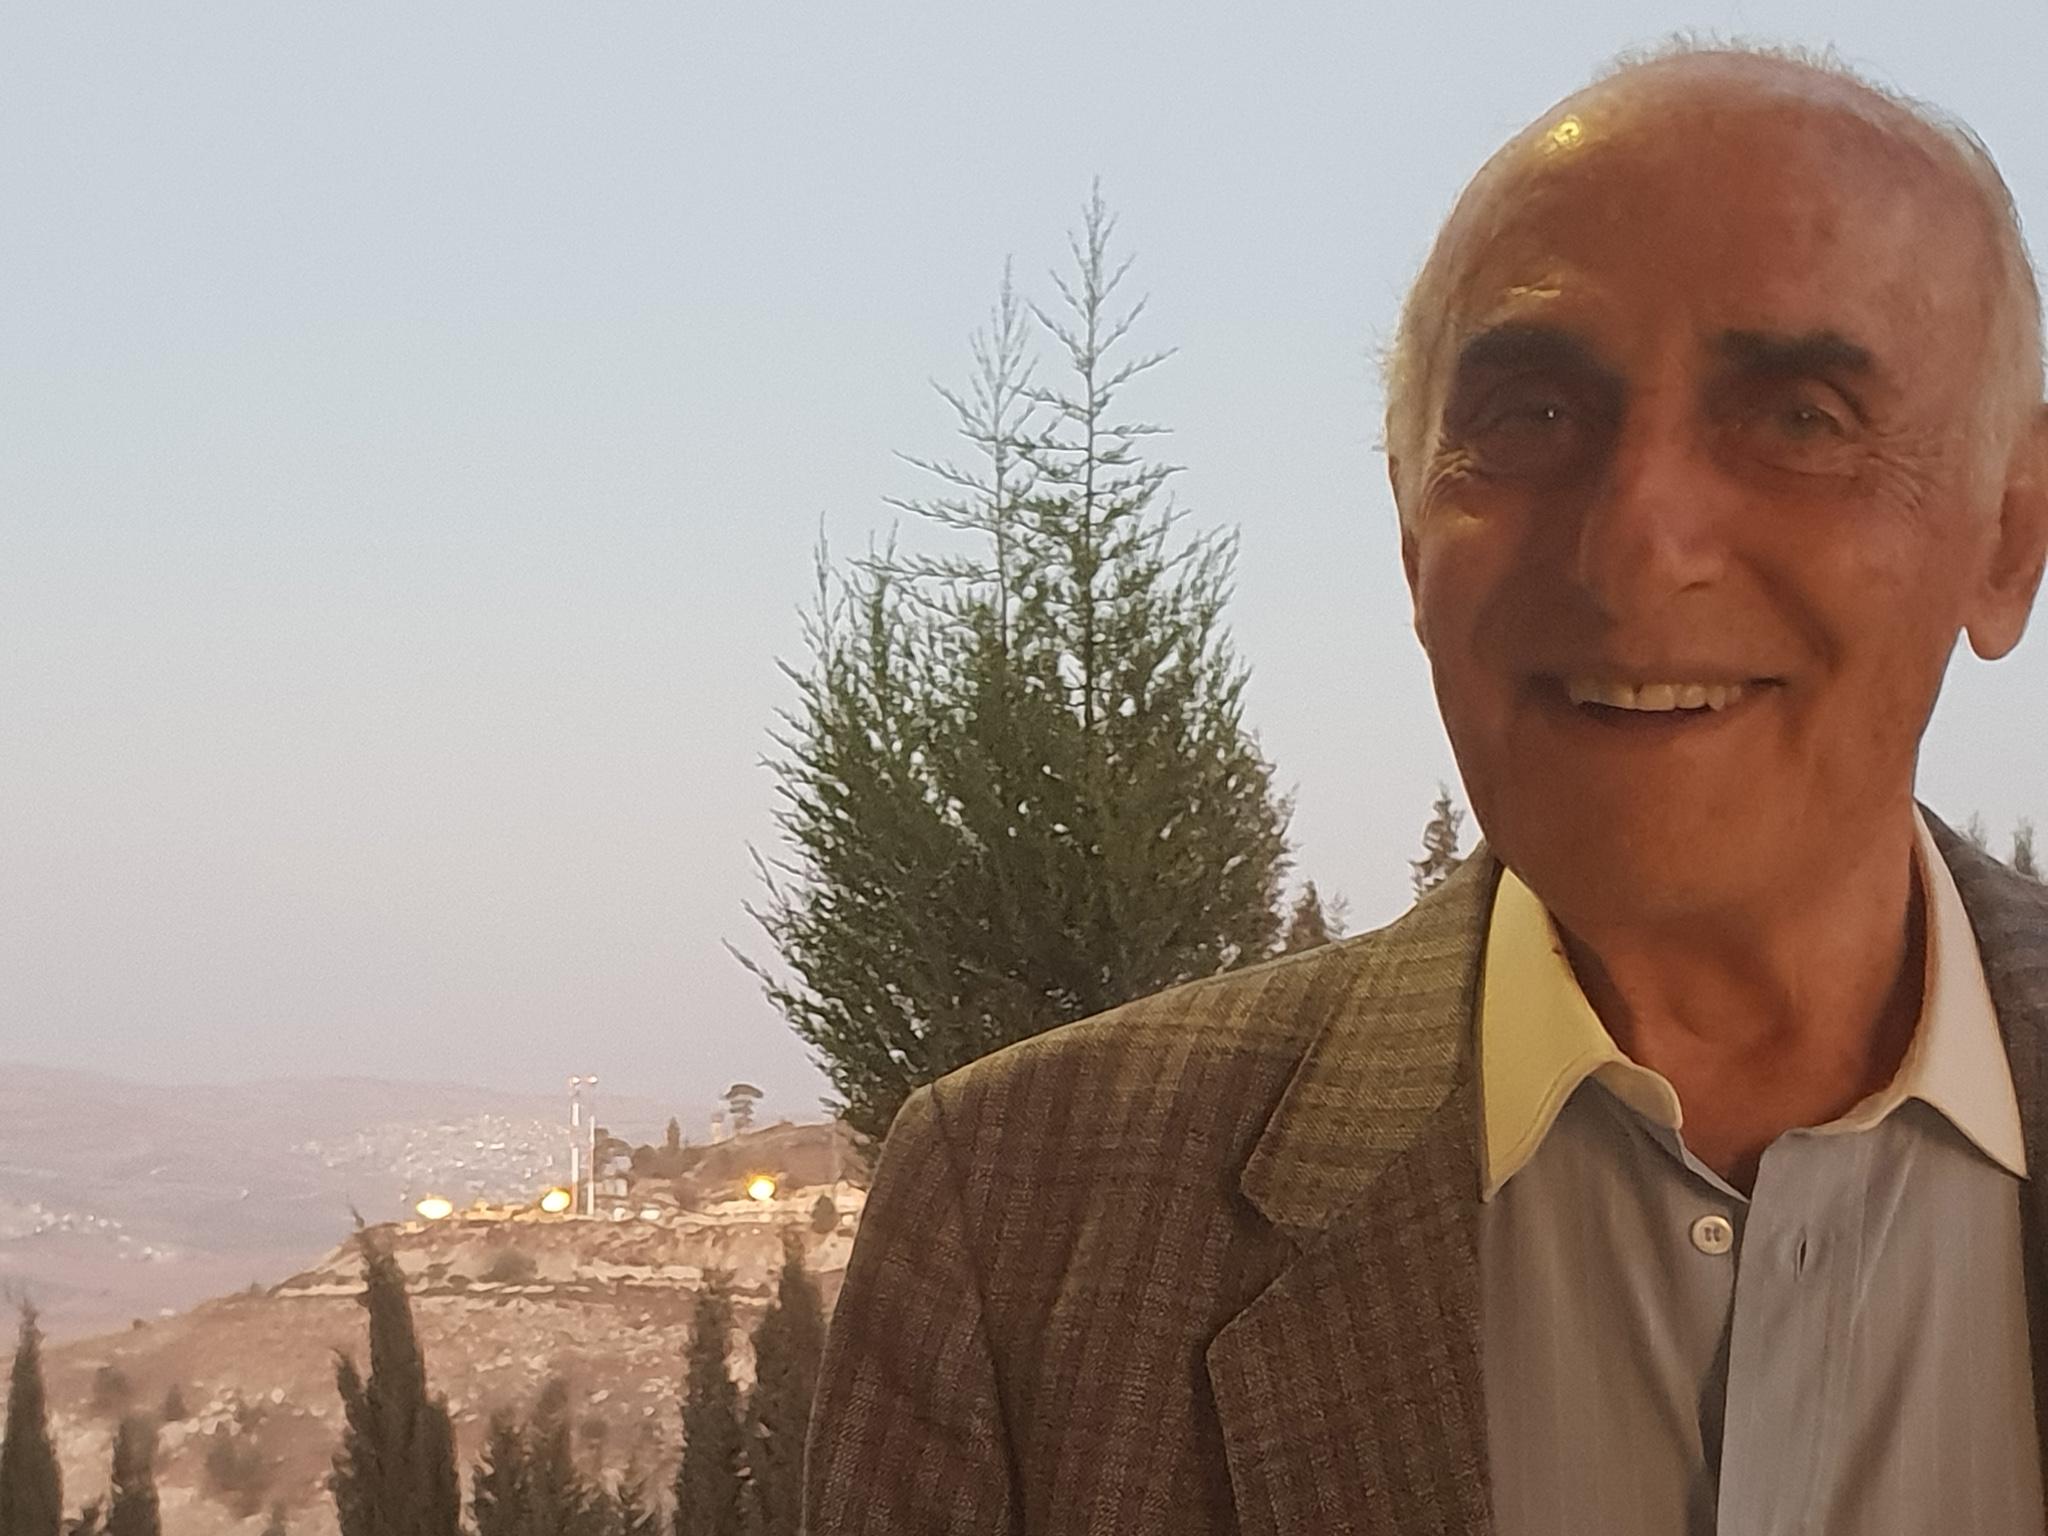 So far and yet so close: the lights of a nearby Jewish settlement shine over Munib Musri's shoulder as he stands on the edge of his vast palace of treasures near Nablus